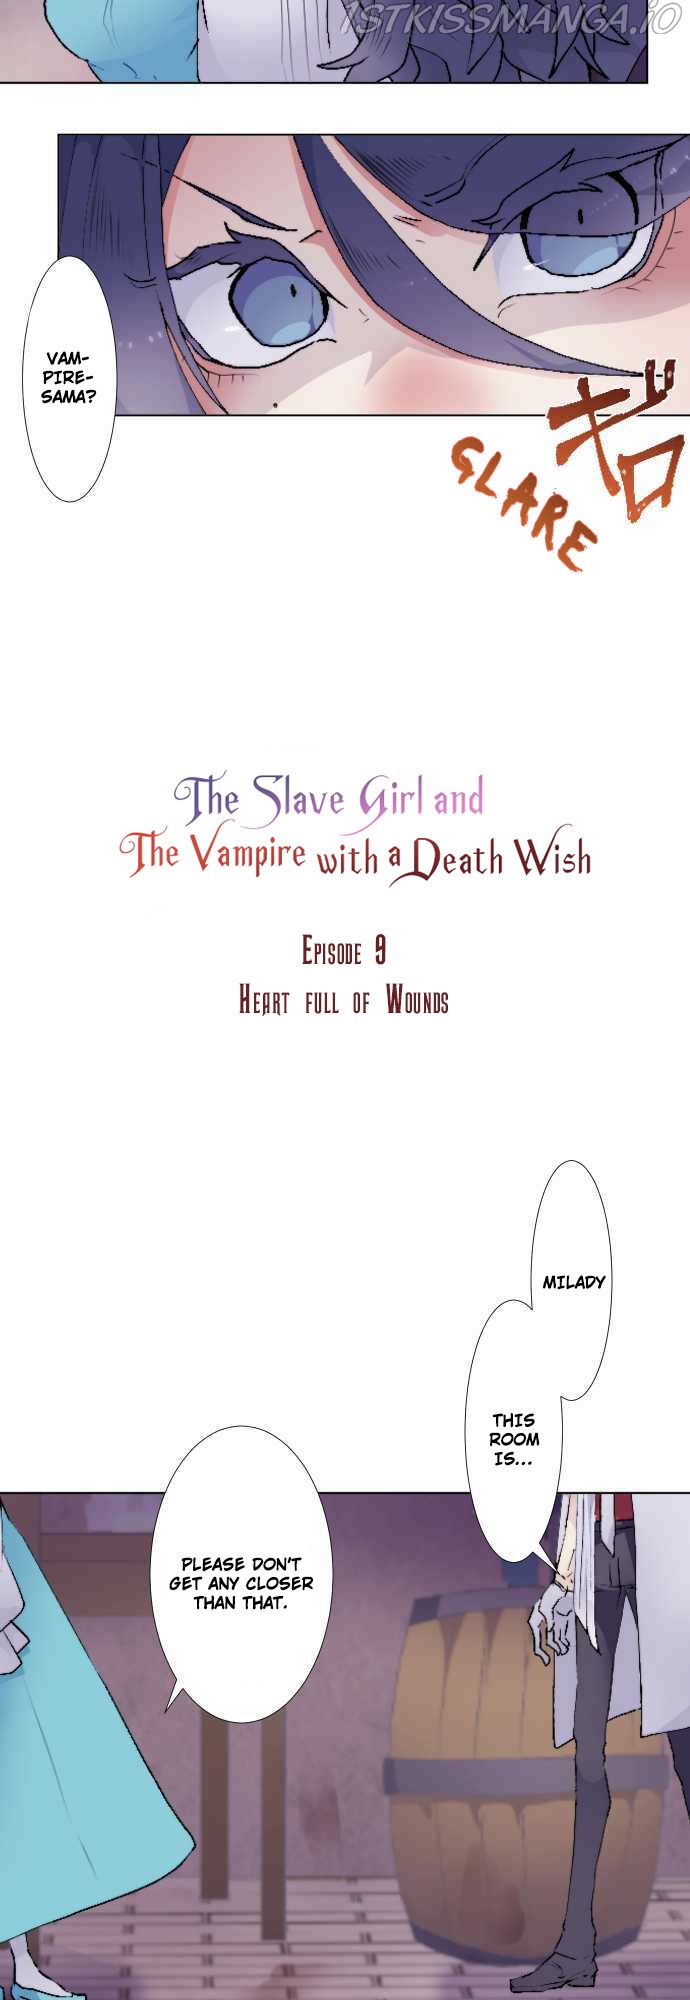 The Slave Girl And The Vampire With A Death Wish - Page 3